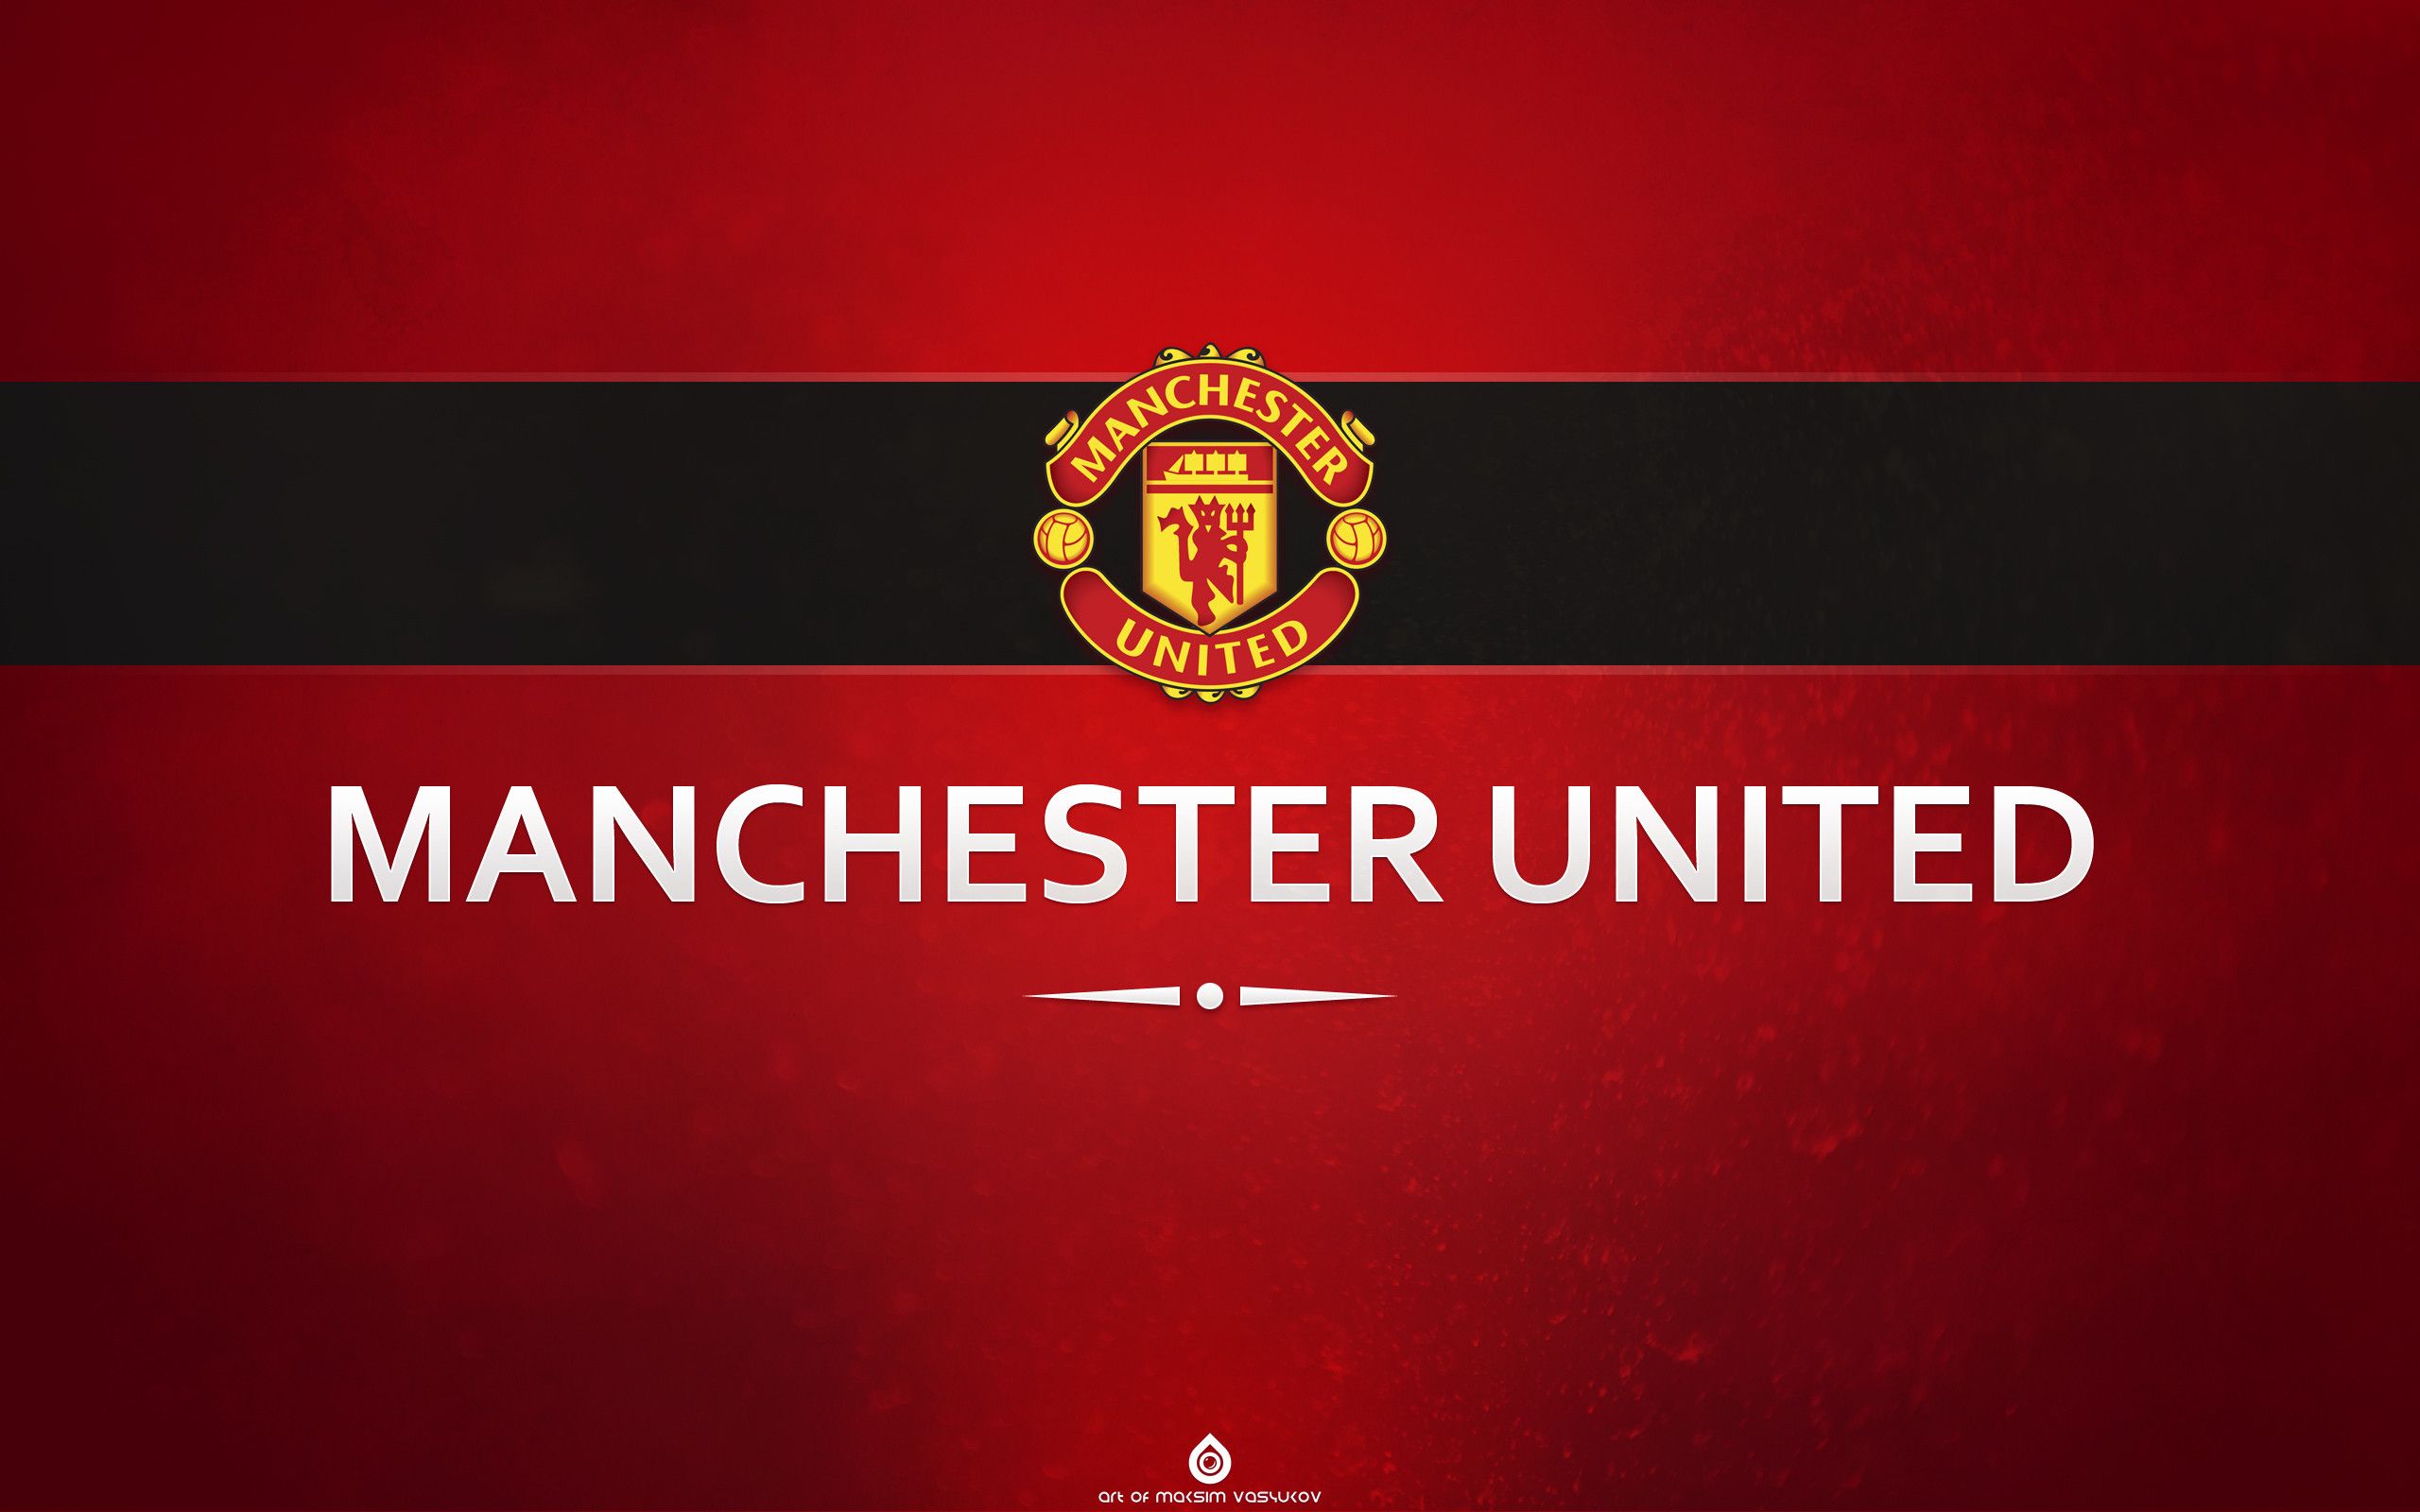 Manchester United Image Epic Wallpaperz